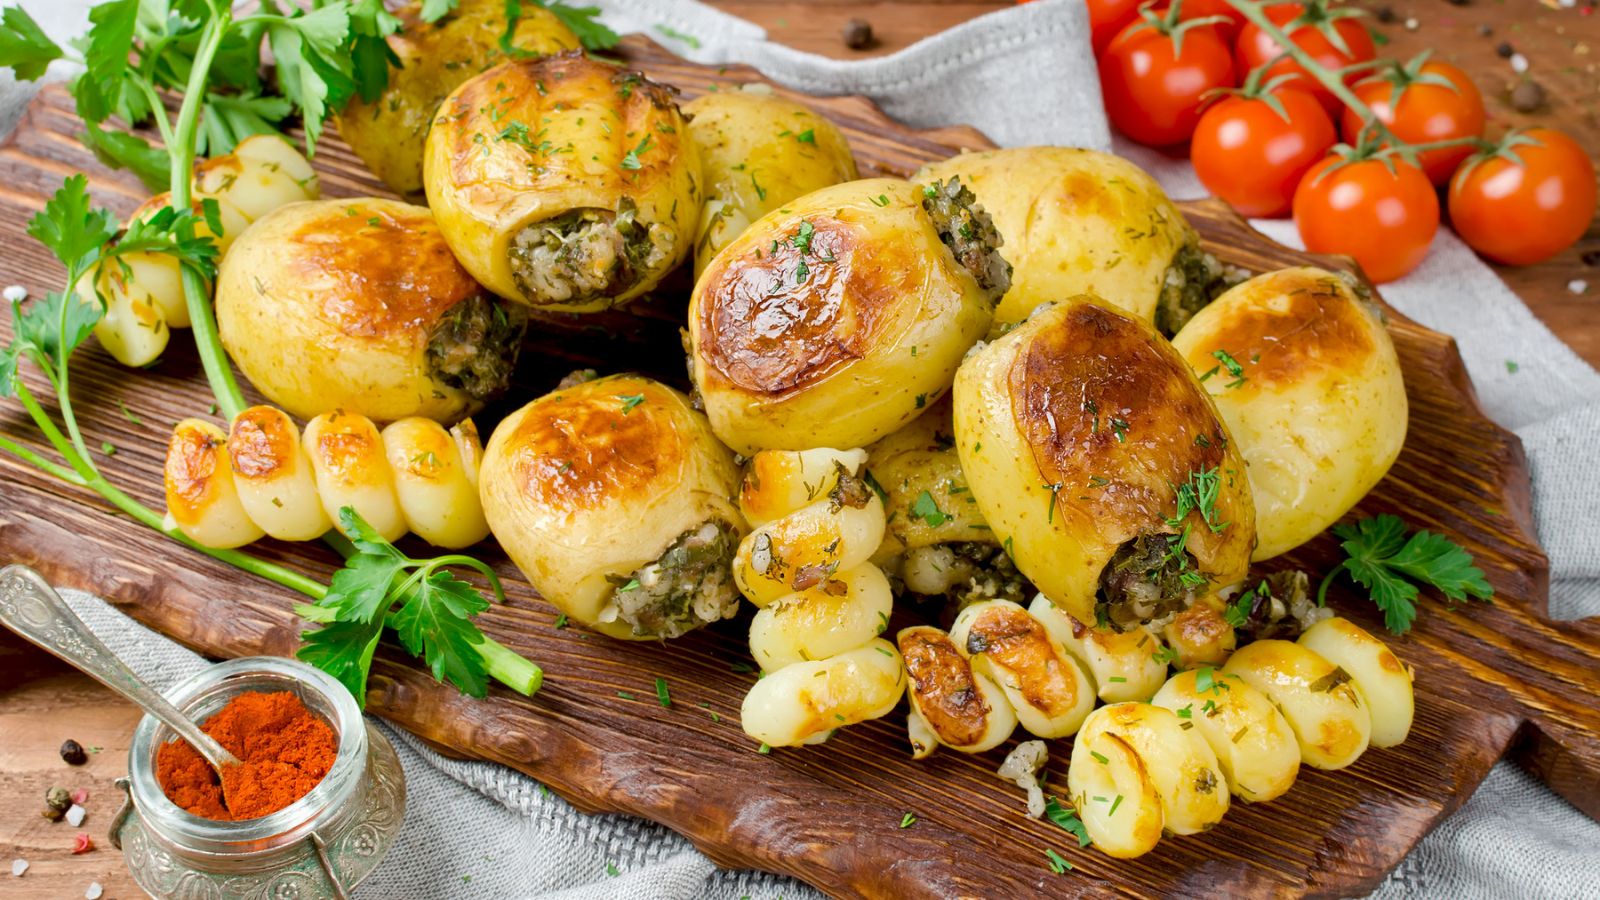 Discover 22 Yummy Potato Recipes Before They’re Gone